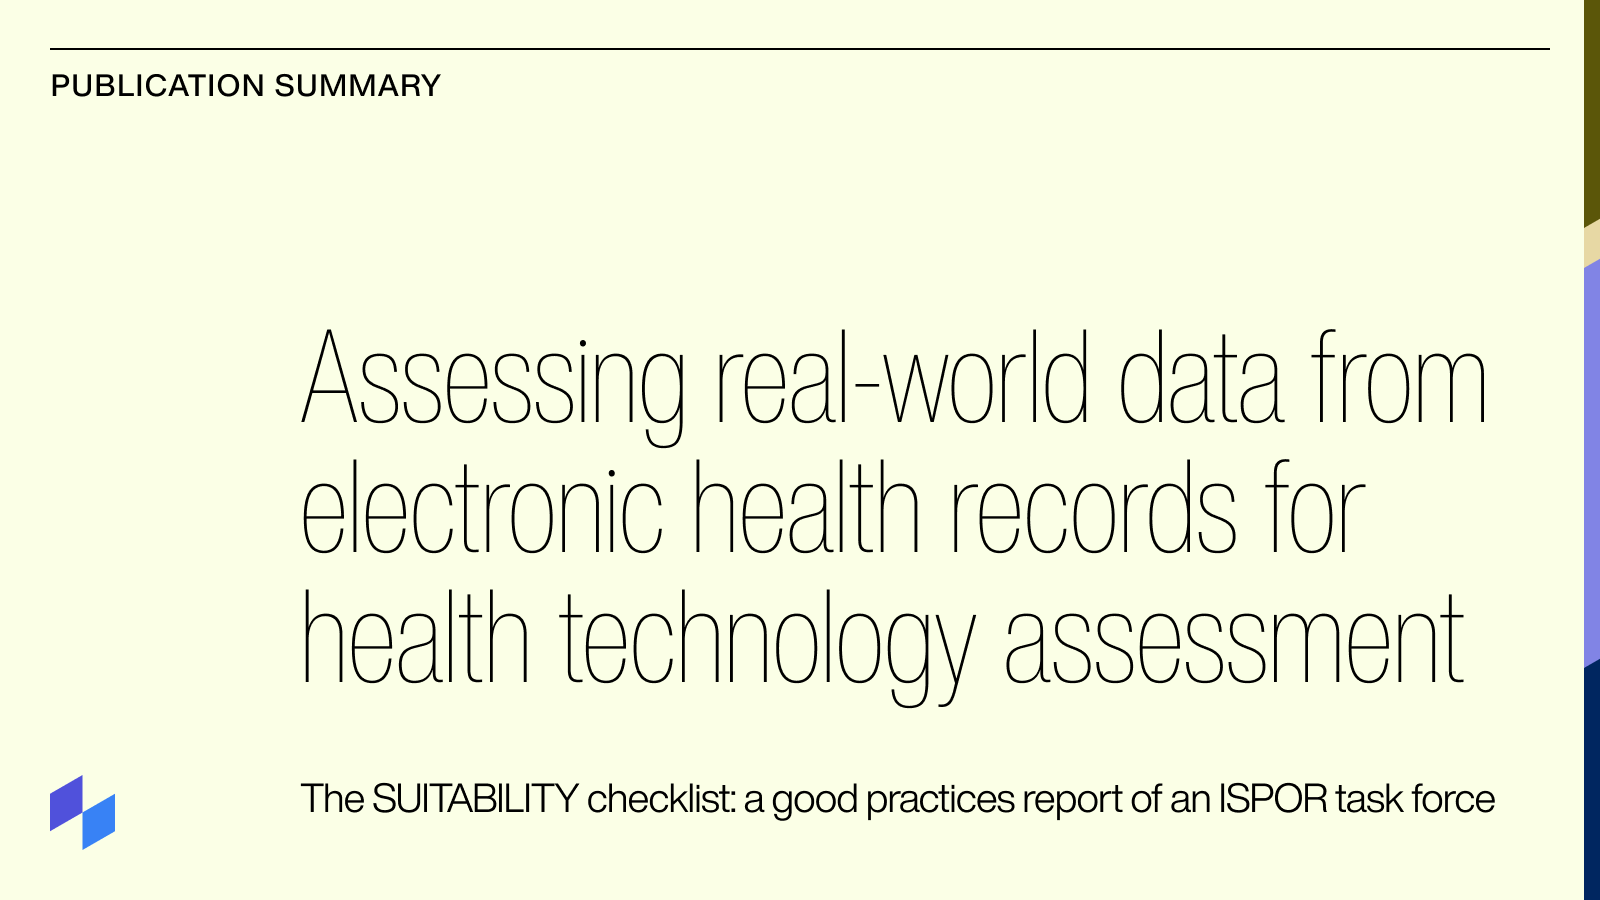 publication summary: assessing real-world data from electronic health records for health technology assessment